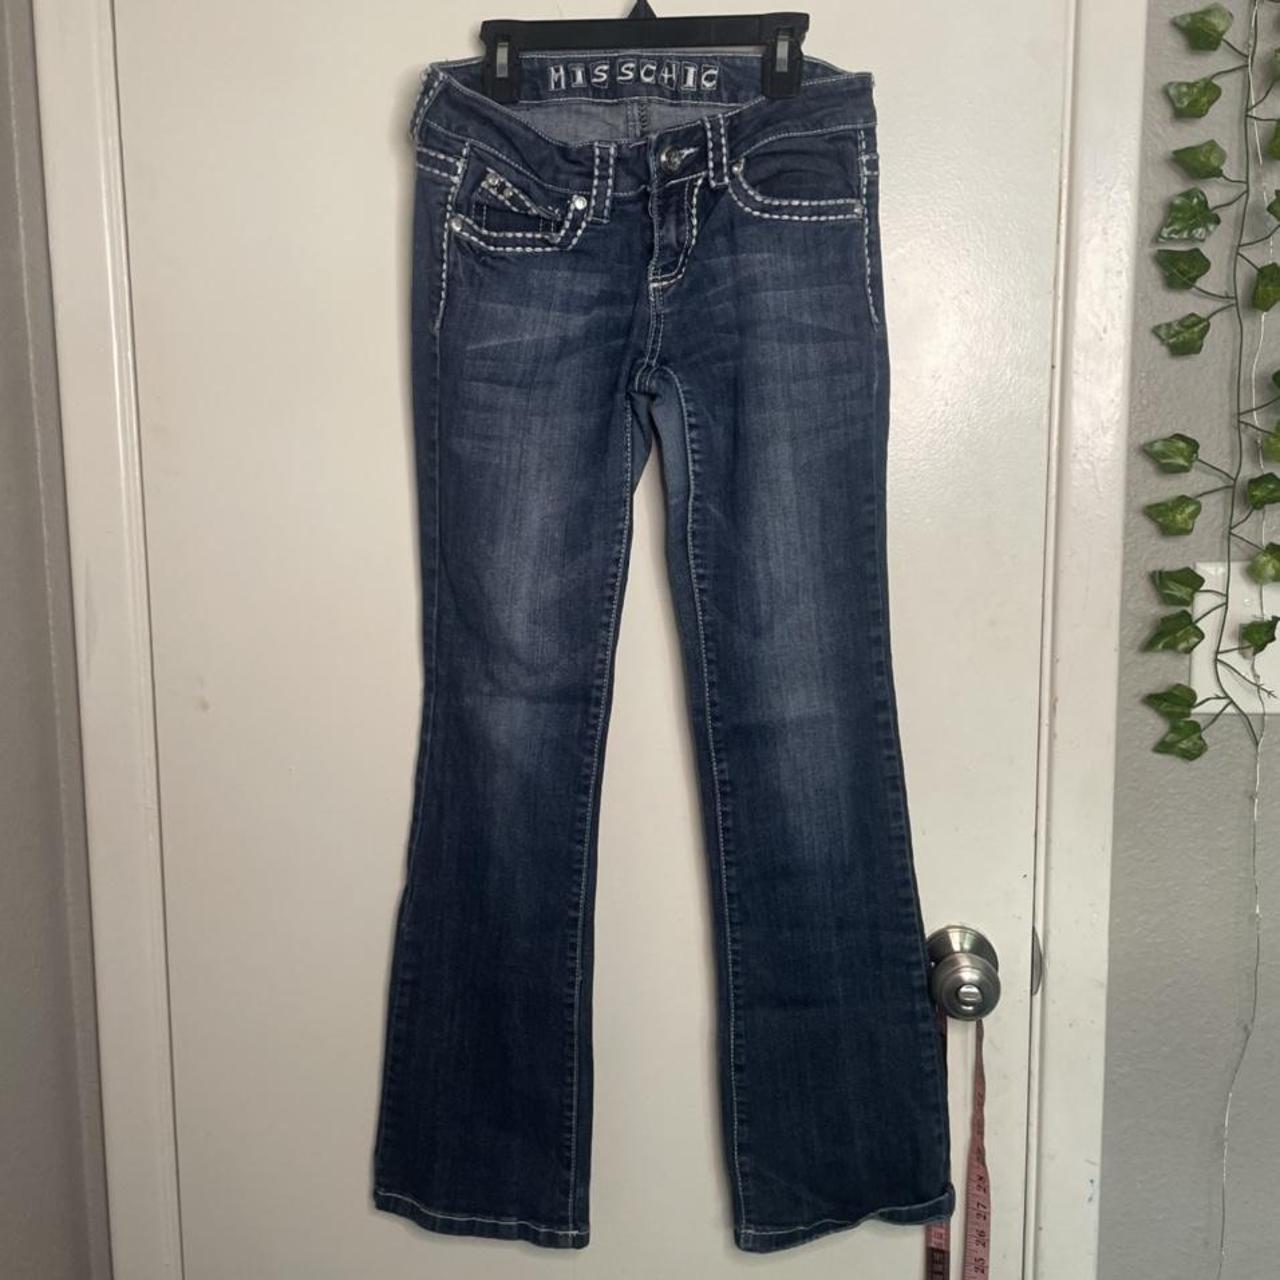 Miss chic flared jeans size 3. This will not fit on... - Depop